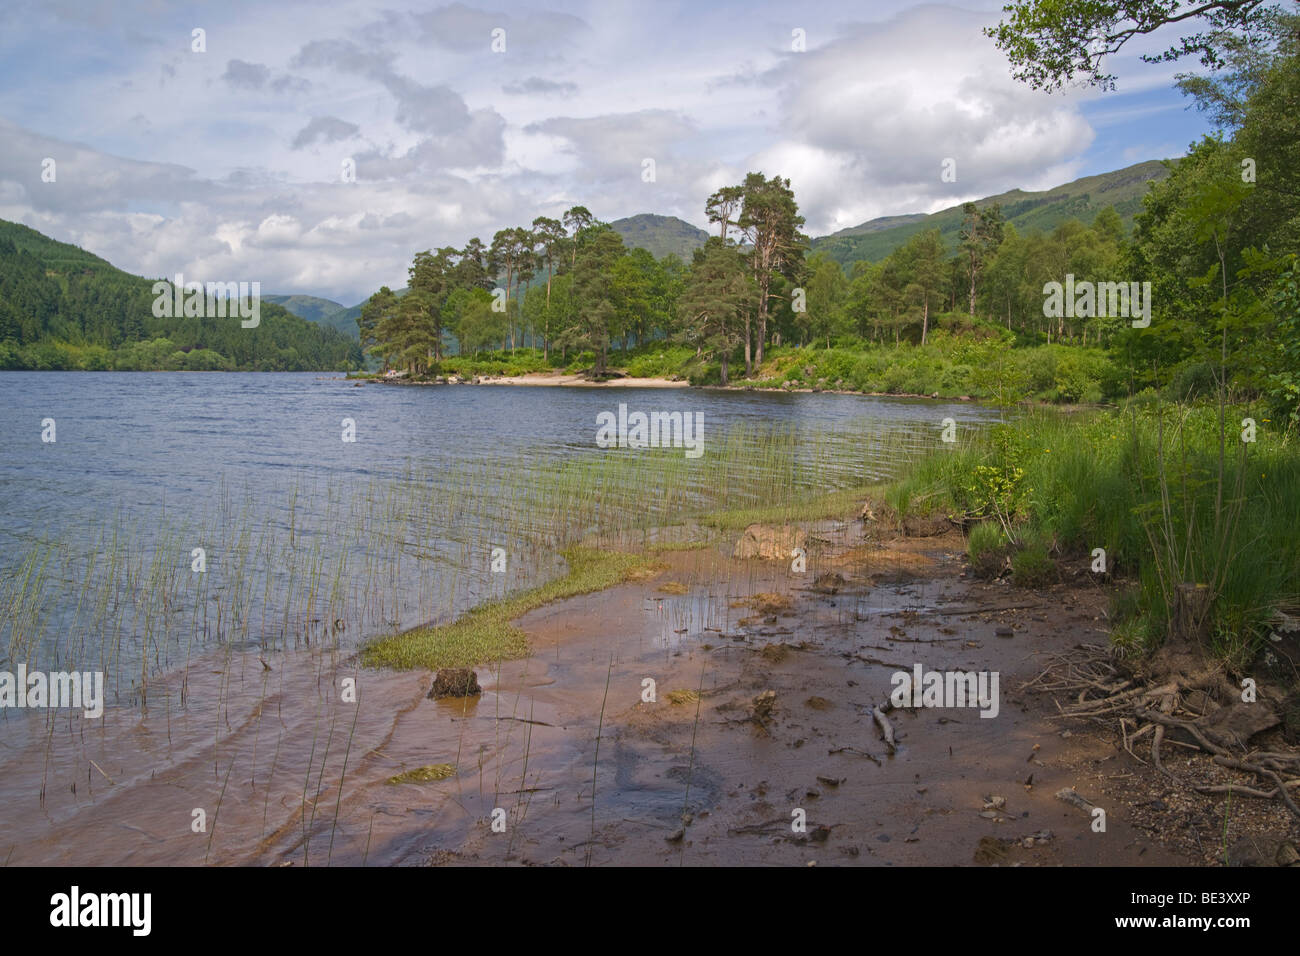 Loch Eck, Argyll forest Park, Argyl and Bute, Scotland. June, 2009 Stock Photo